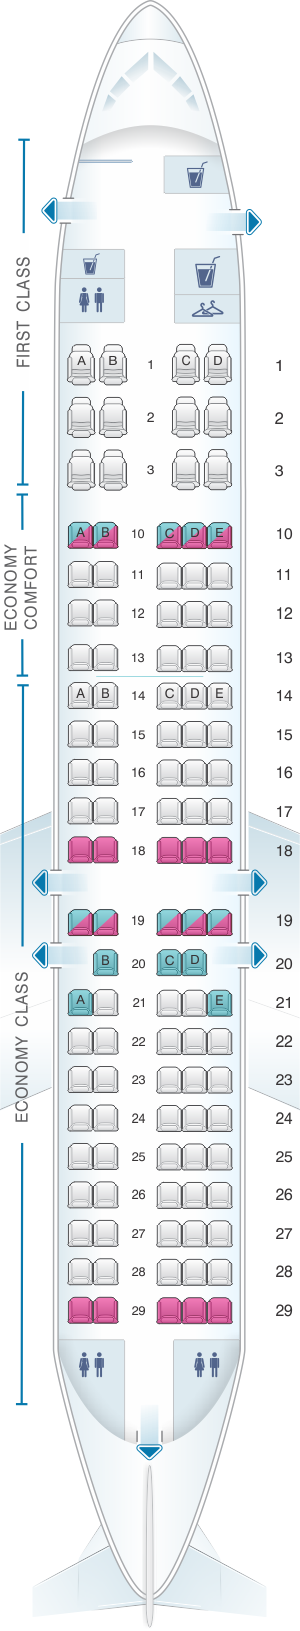 delta check in seat assignment